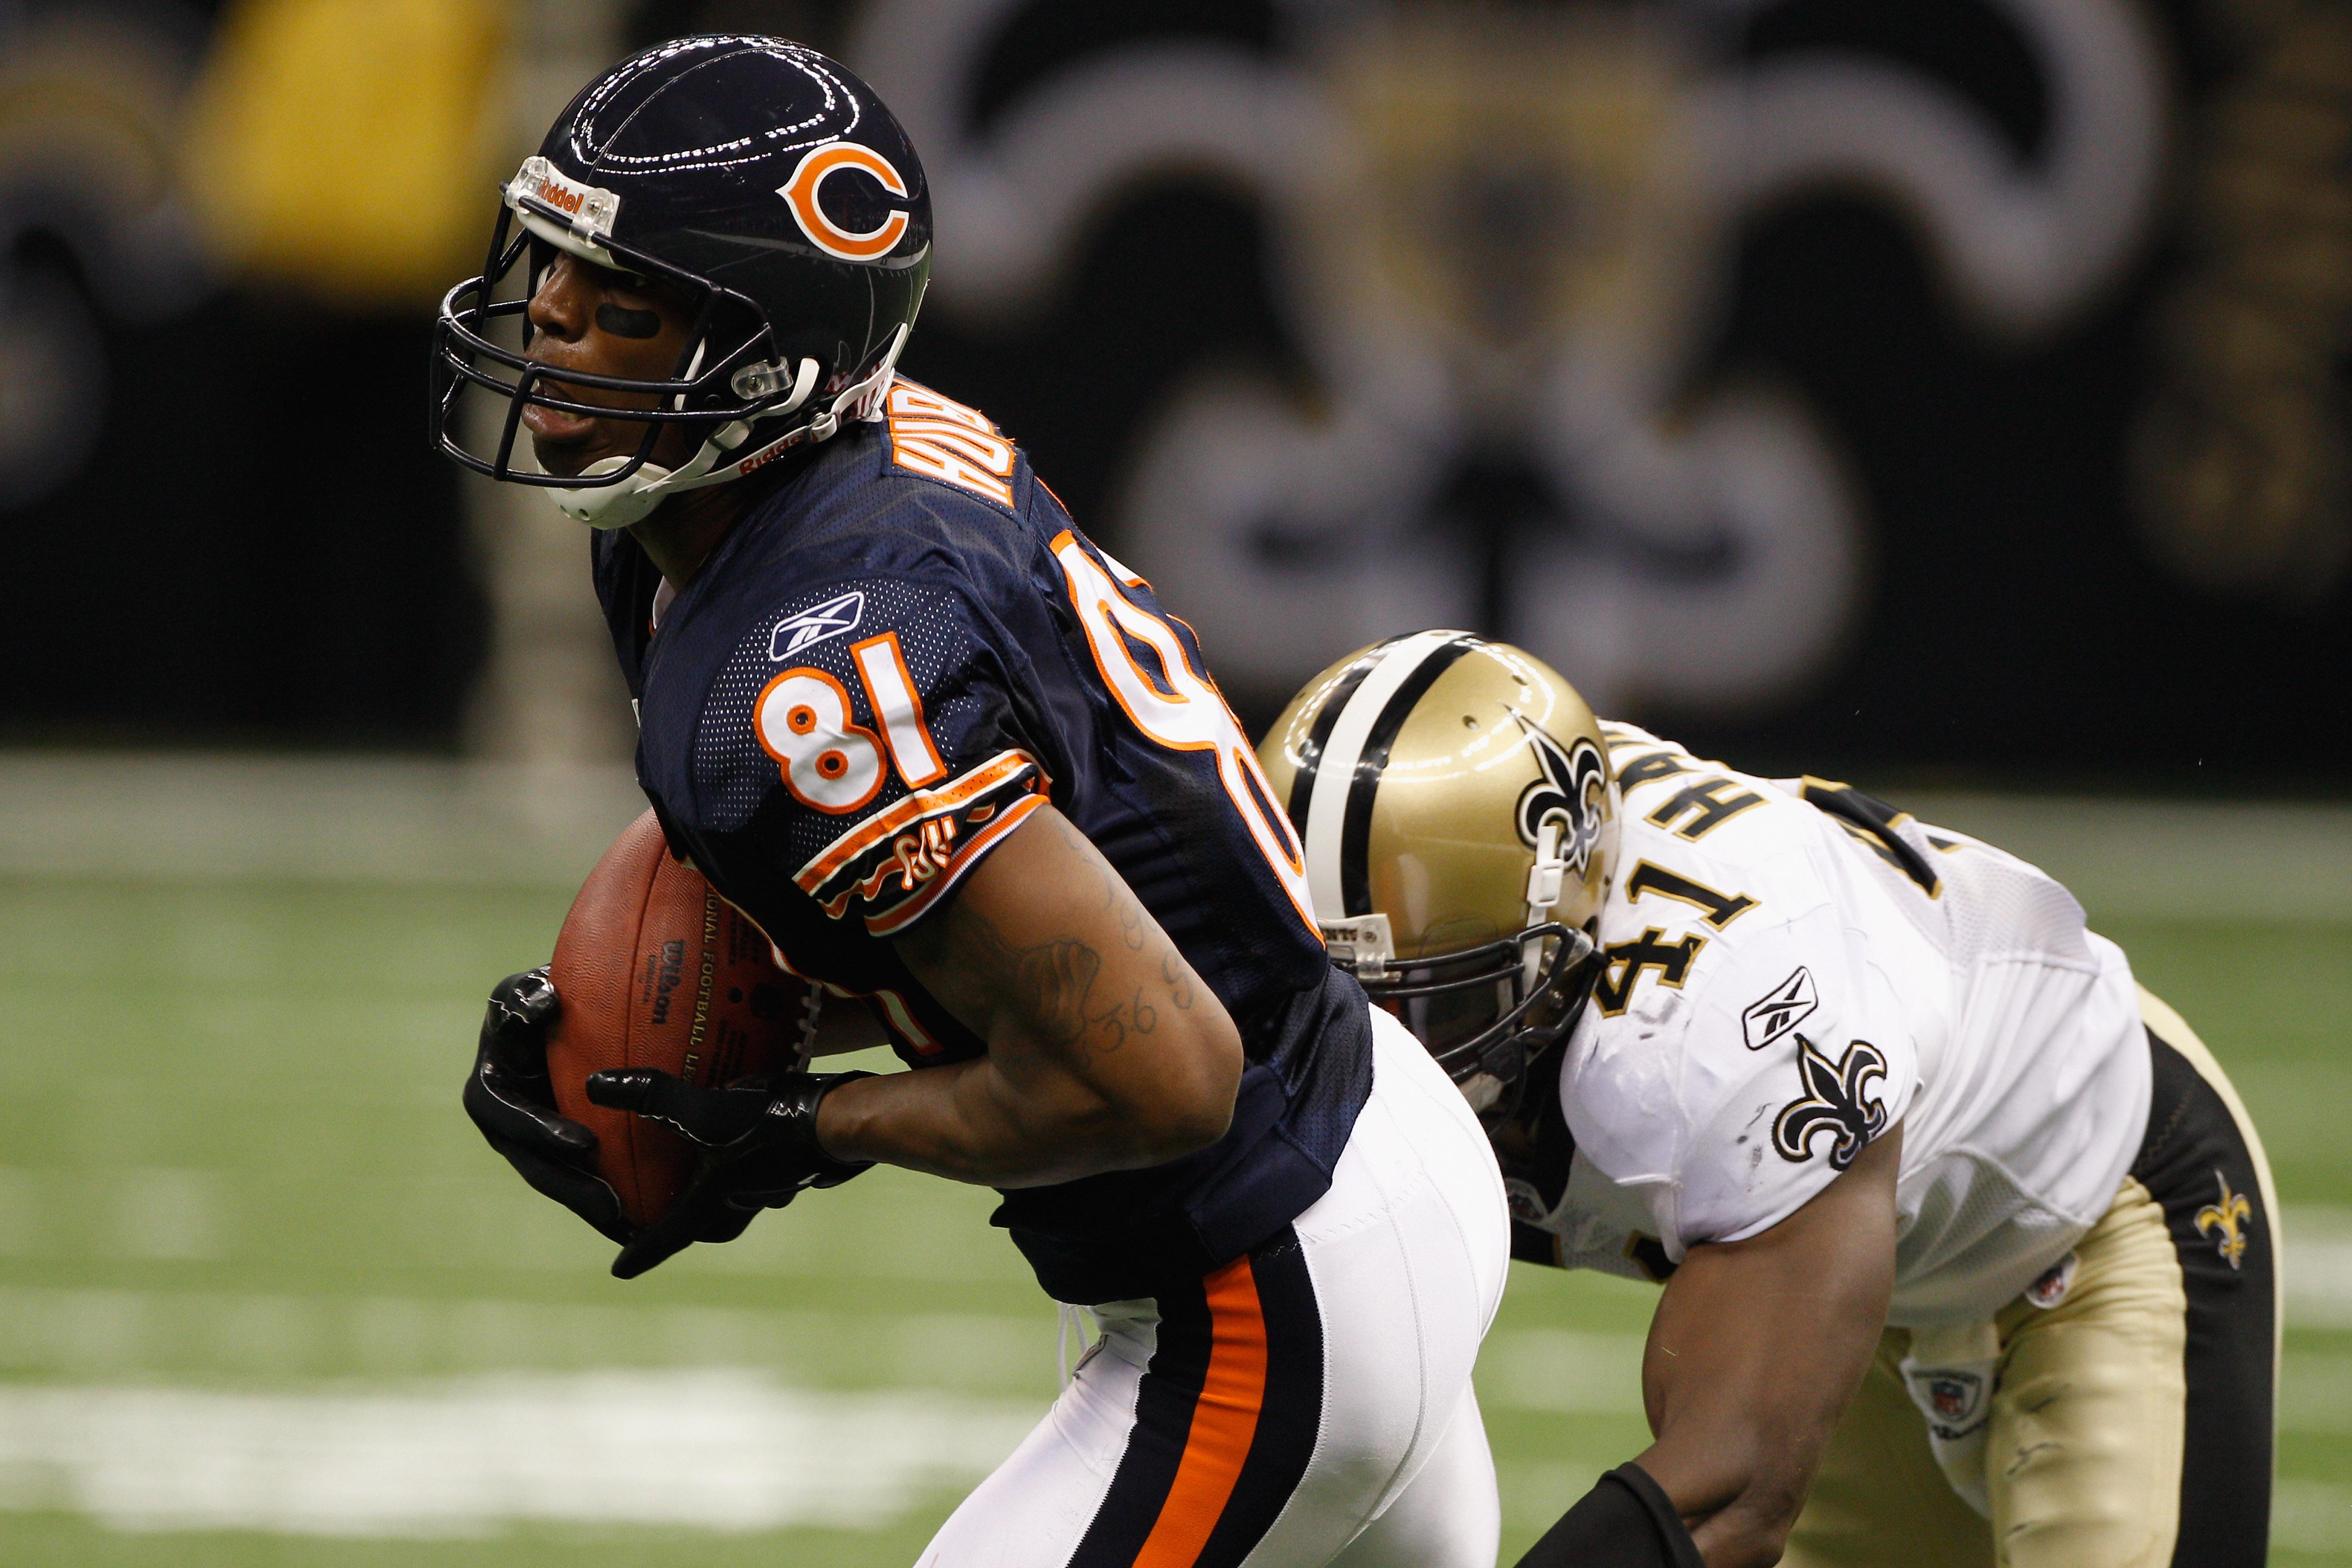 Sam Hurd of the Chicago Bears catches a pass over Roman Harper of the New Orleans Saints on September 18, 2011 in New Orleans, Louisiana.